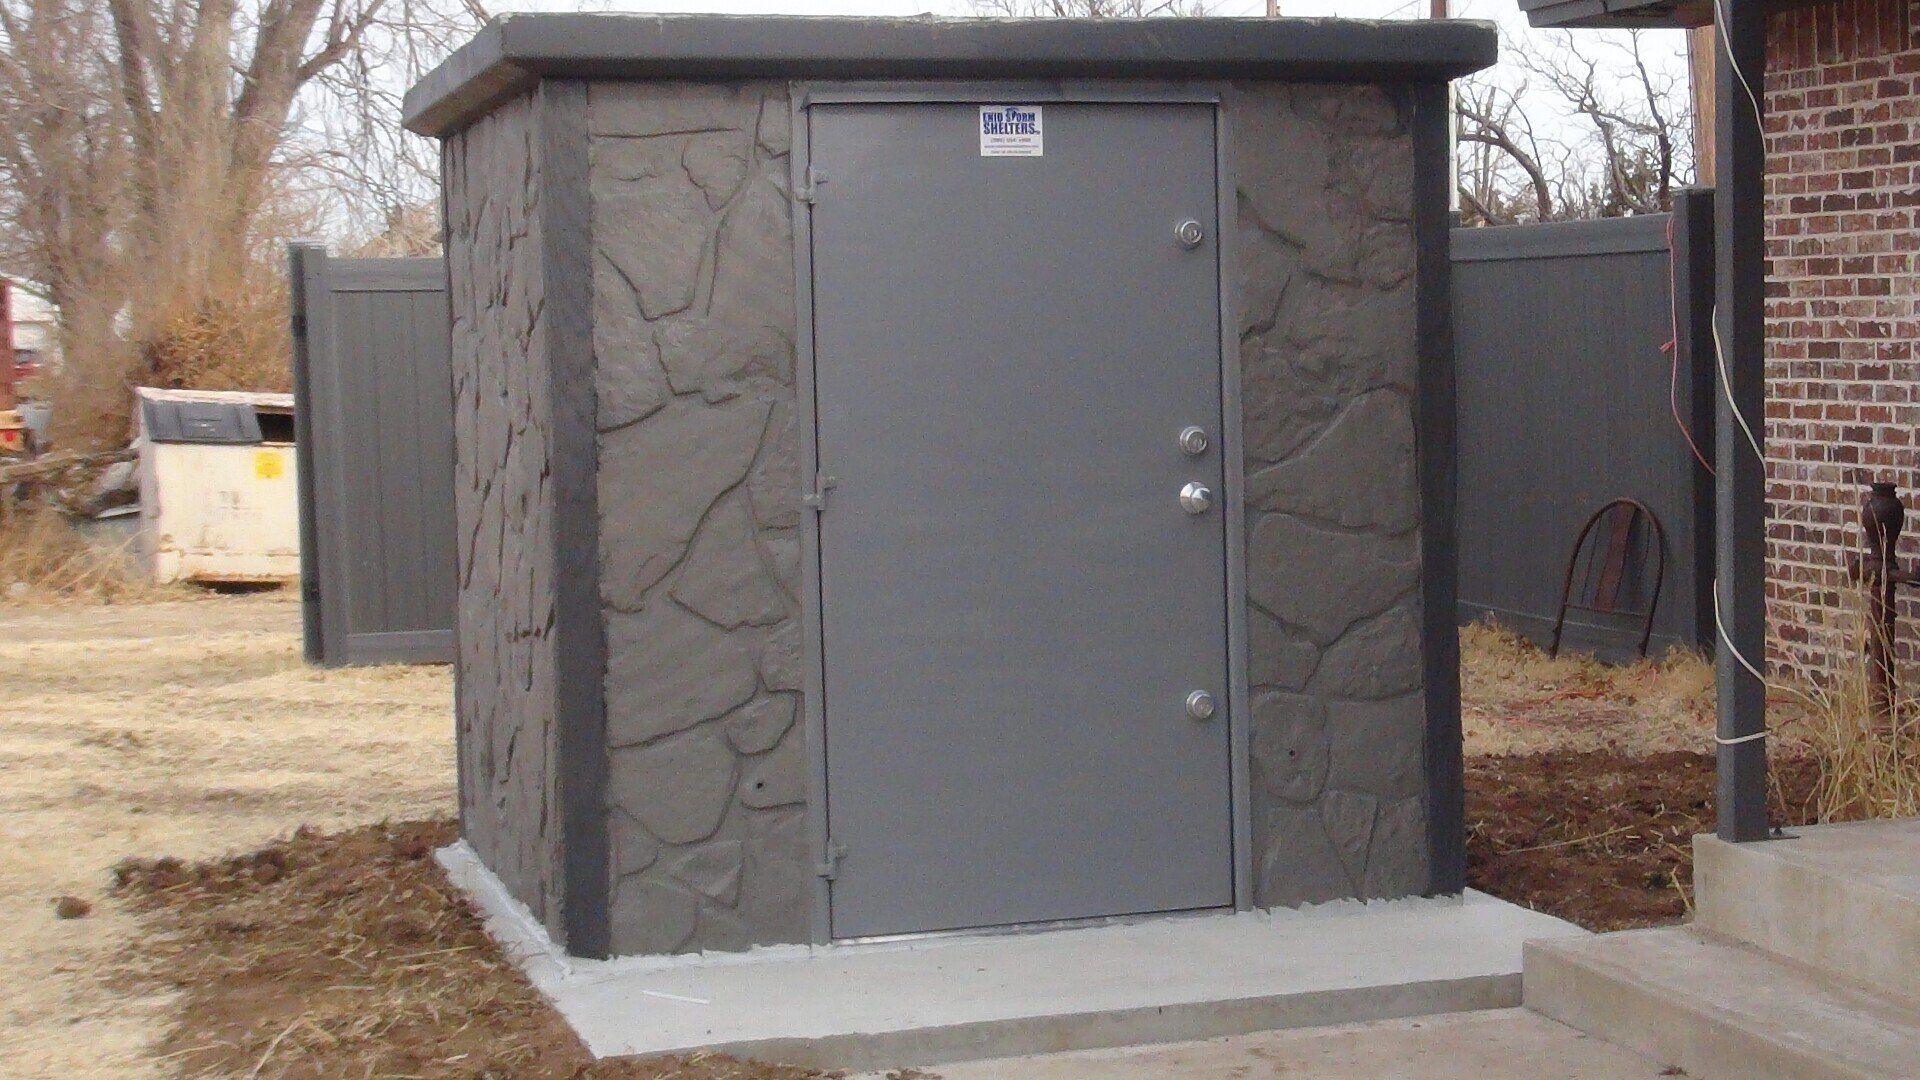 Above-ground concrete shelter